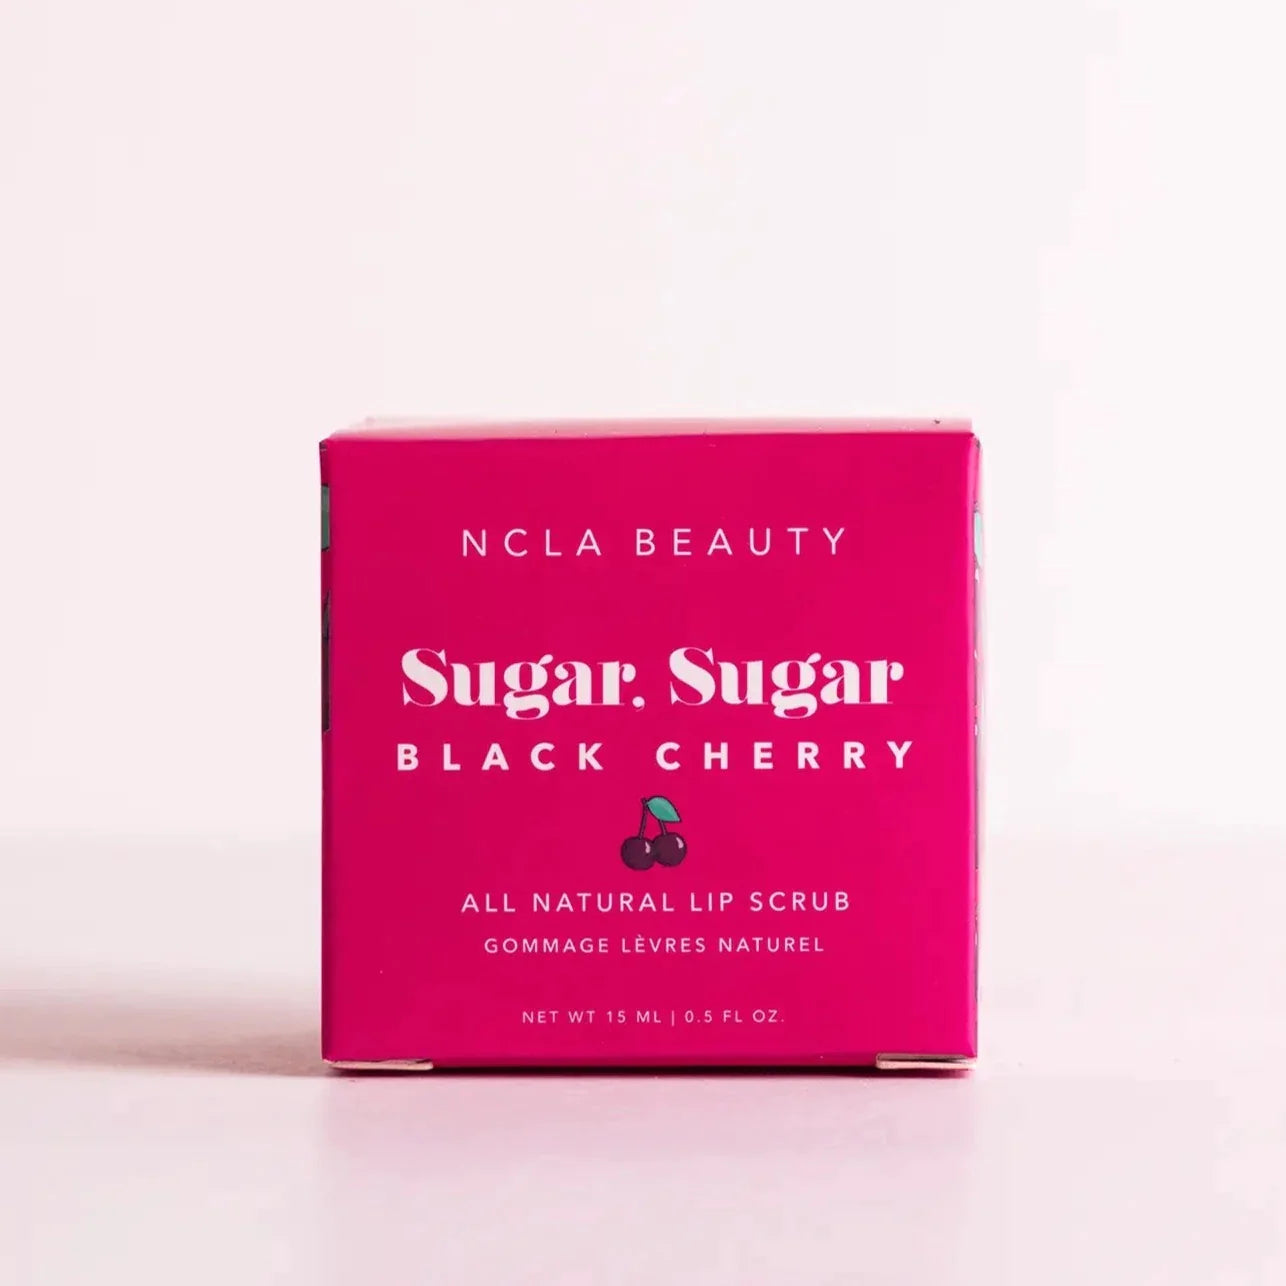 Magenta square box with white text on the front. Text reads "NCLA Beauty Sugar, Sugar Black Cherry All Natural Lip Scrub". Has a small cherry illustration under the name